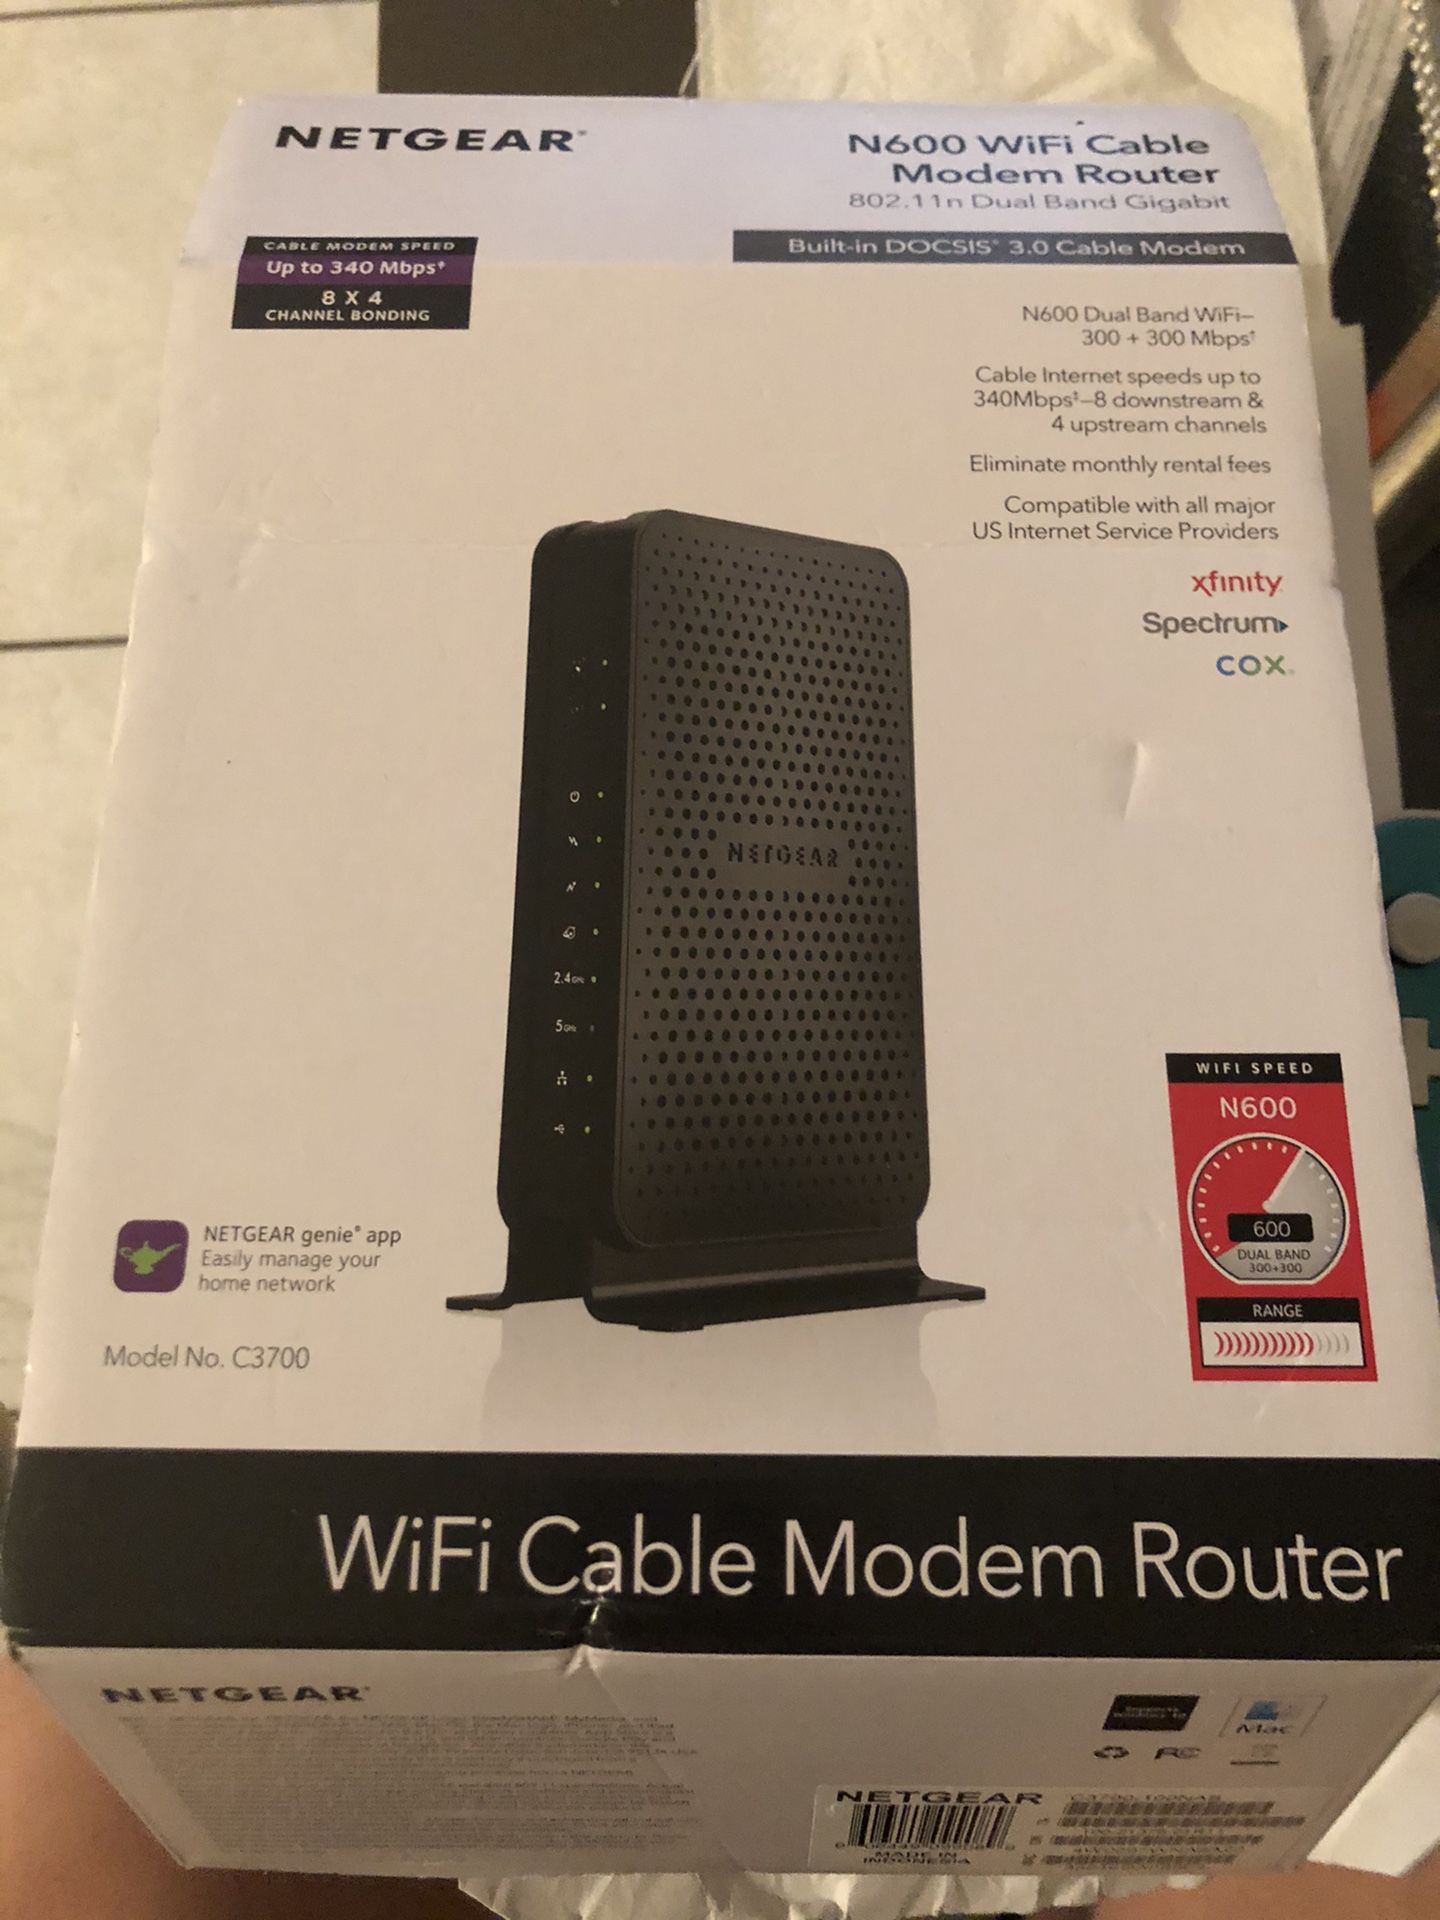 No negotiable price-WiFi cable modem router Netgear N600. Xfinity